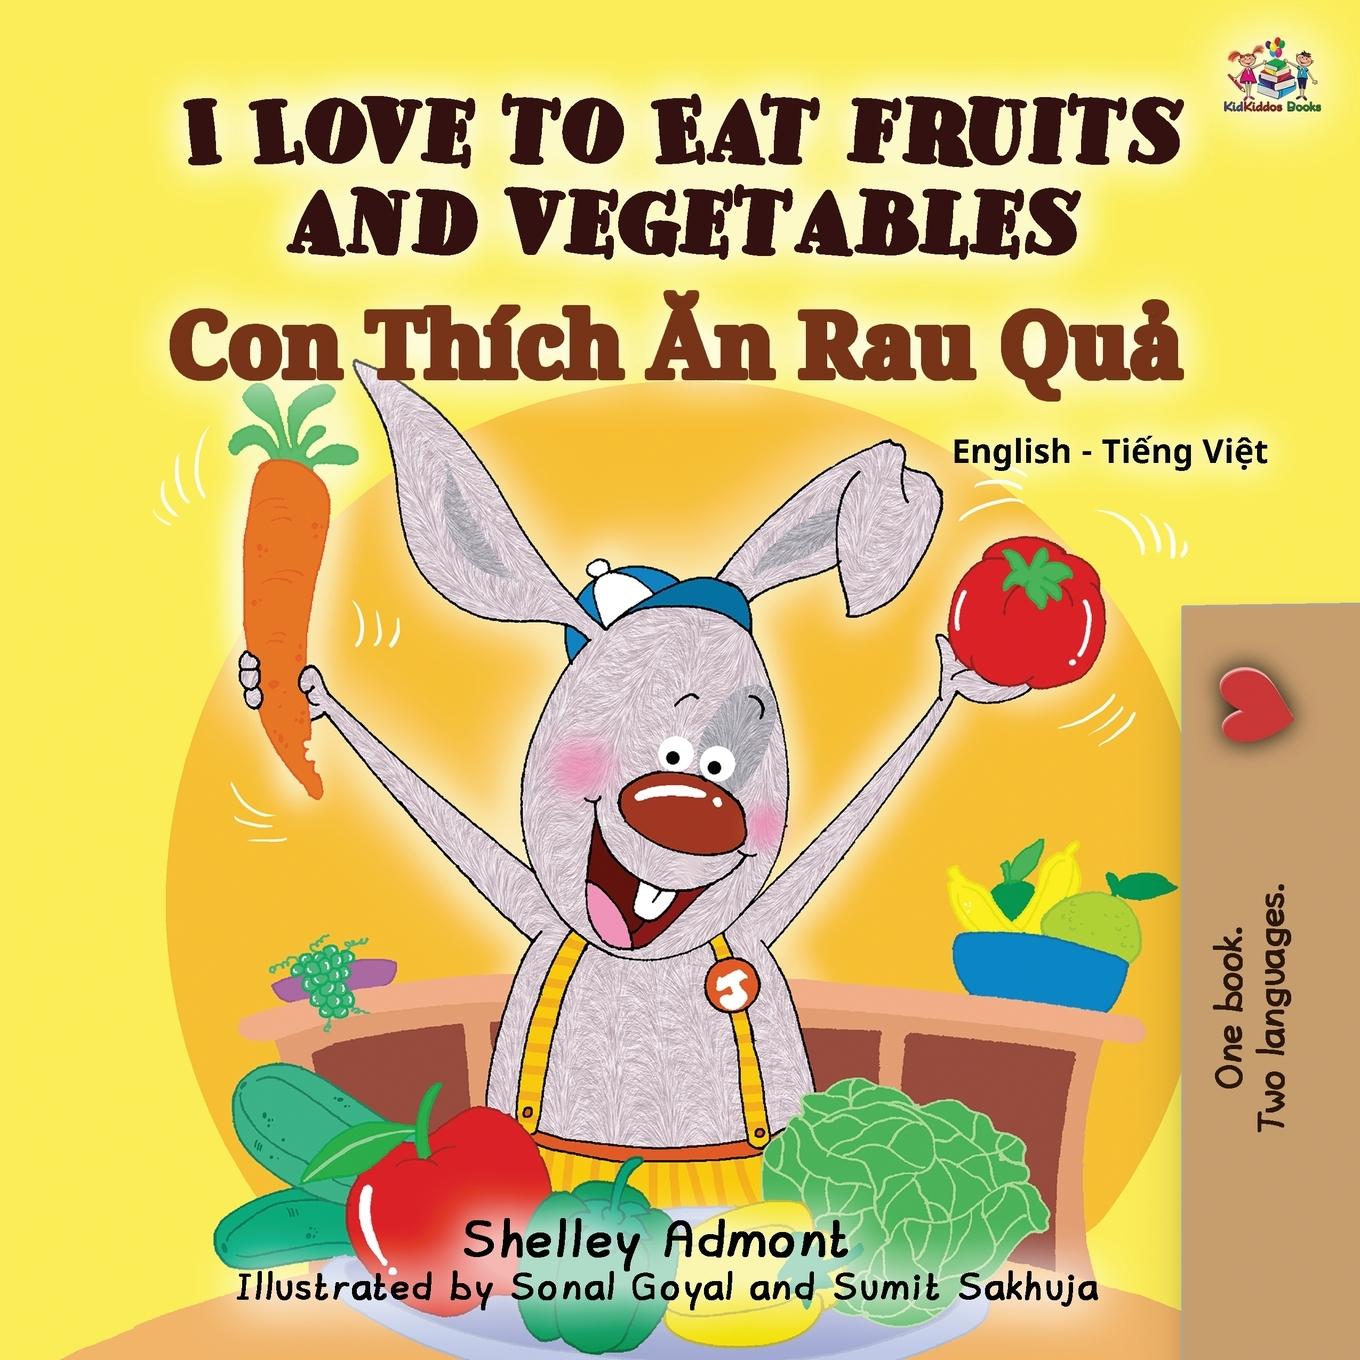 Carte I Love to Eat Fruits and Vegetables (English Vietnamese Bilingual Book for Kids) Kidkiddos Books